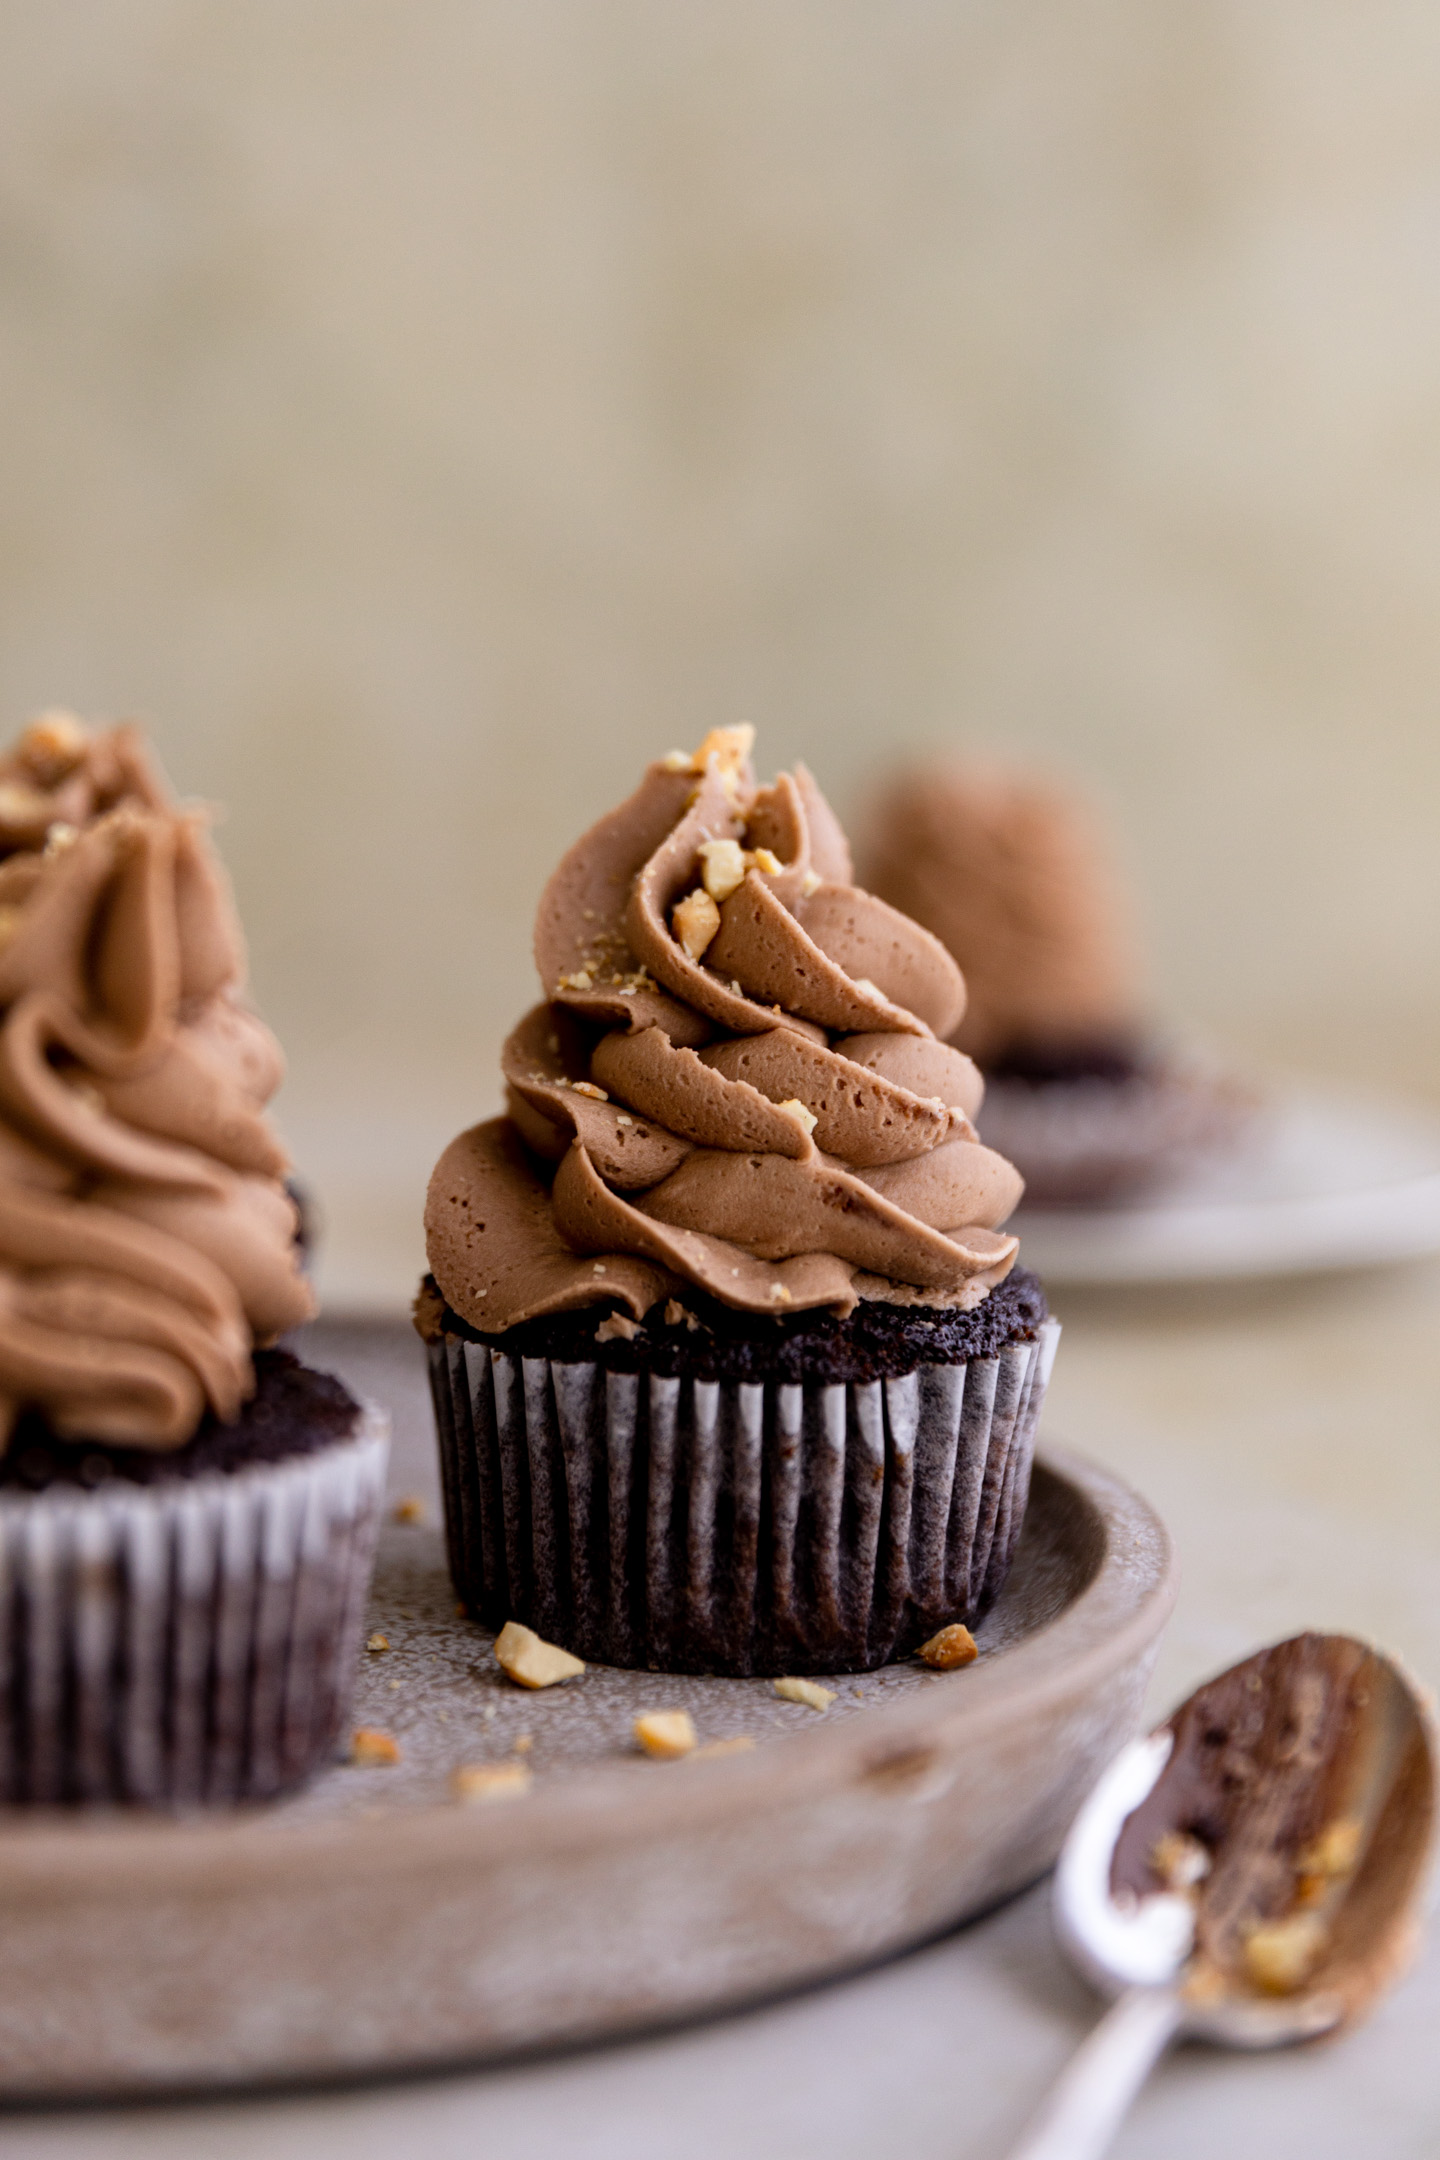 A Nutella cupcake on a brown plate.